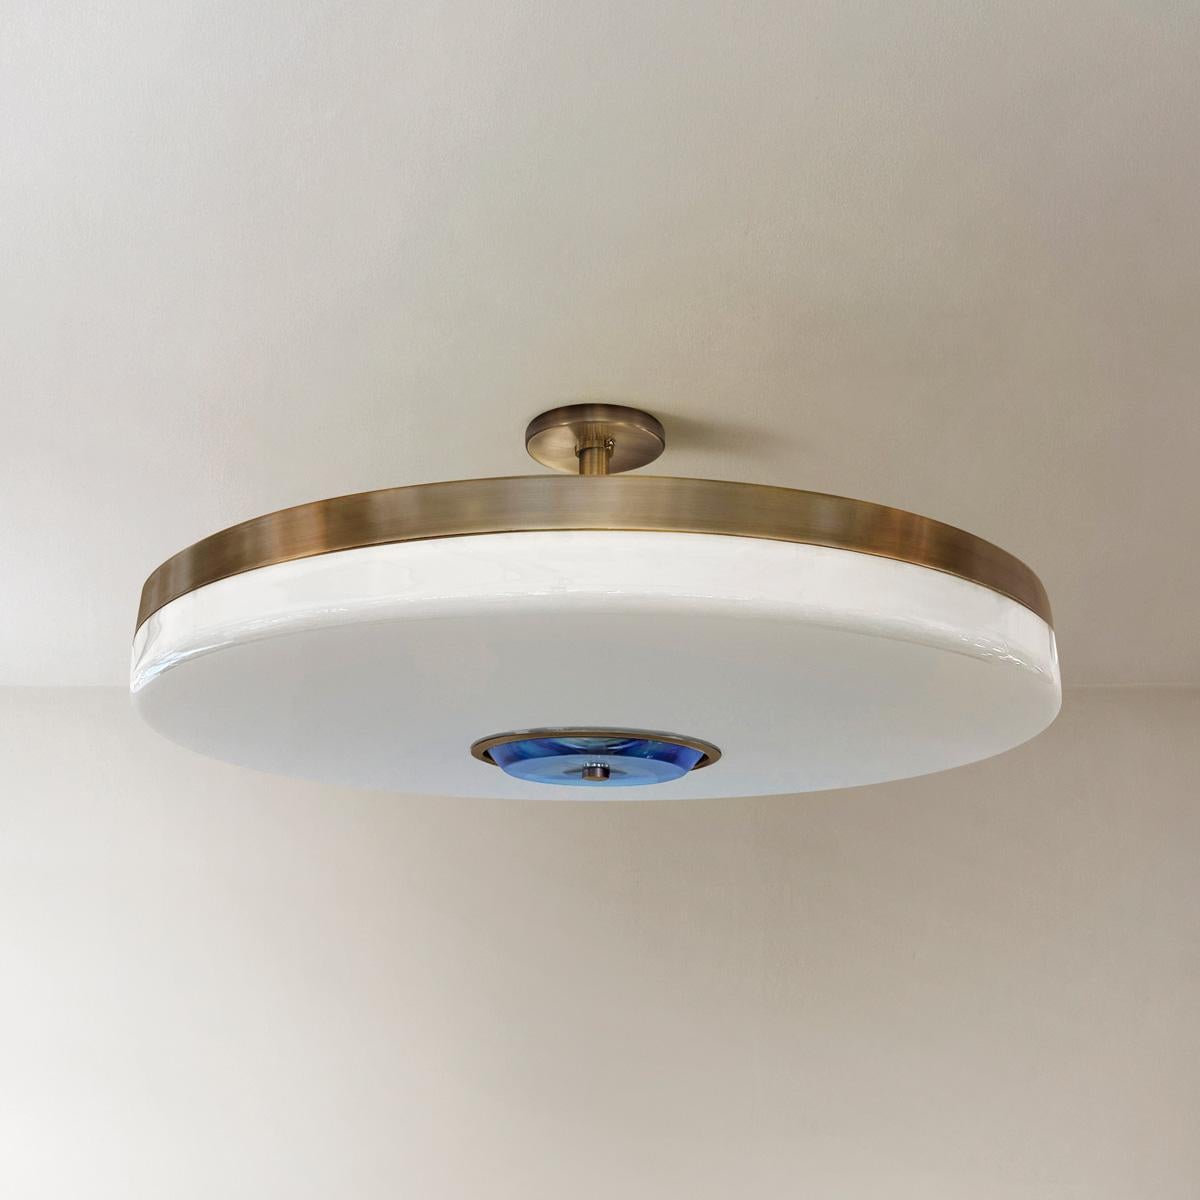 The Iris ceiling light is designed around an expansive acrylic shade with a hand carved glass center. This versatile fixture can be installed as a pendant on a stem or as a true flush mount. The first images show the fixture in our Bronzo Ottone